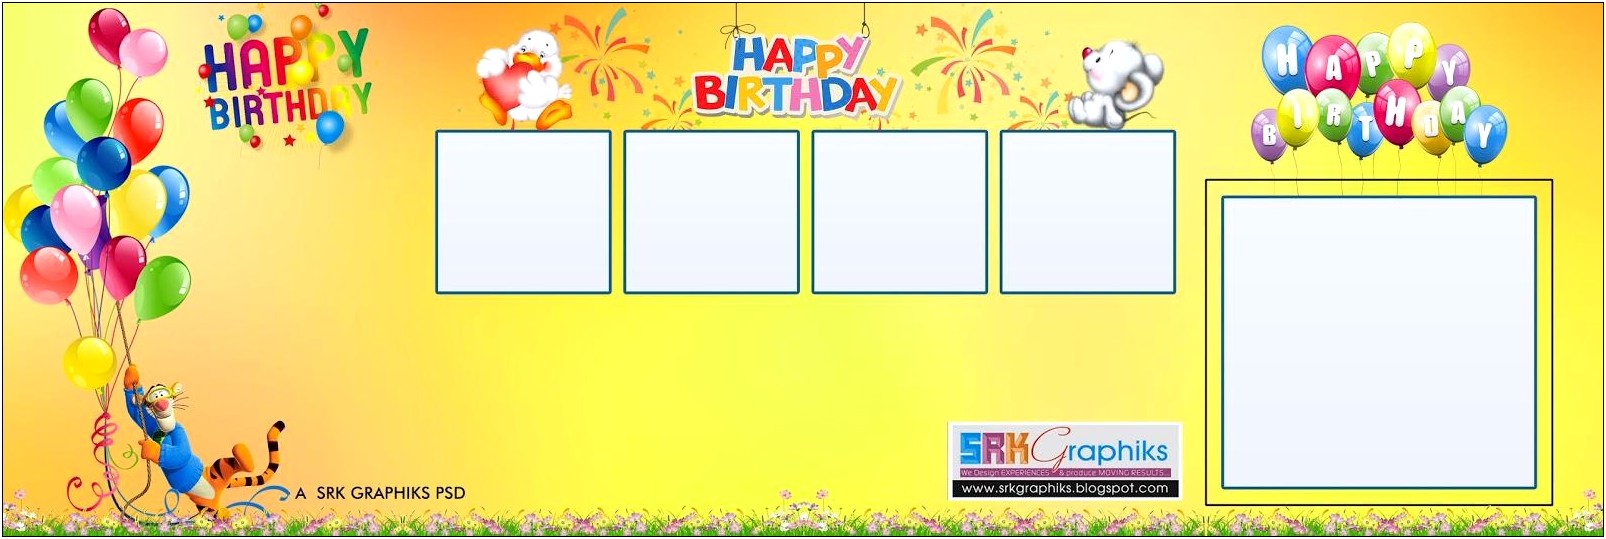 Happy Birthday Photoshop Template Free Download